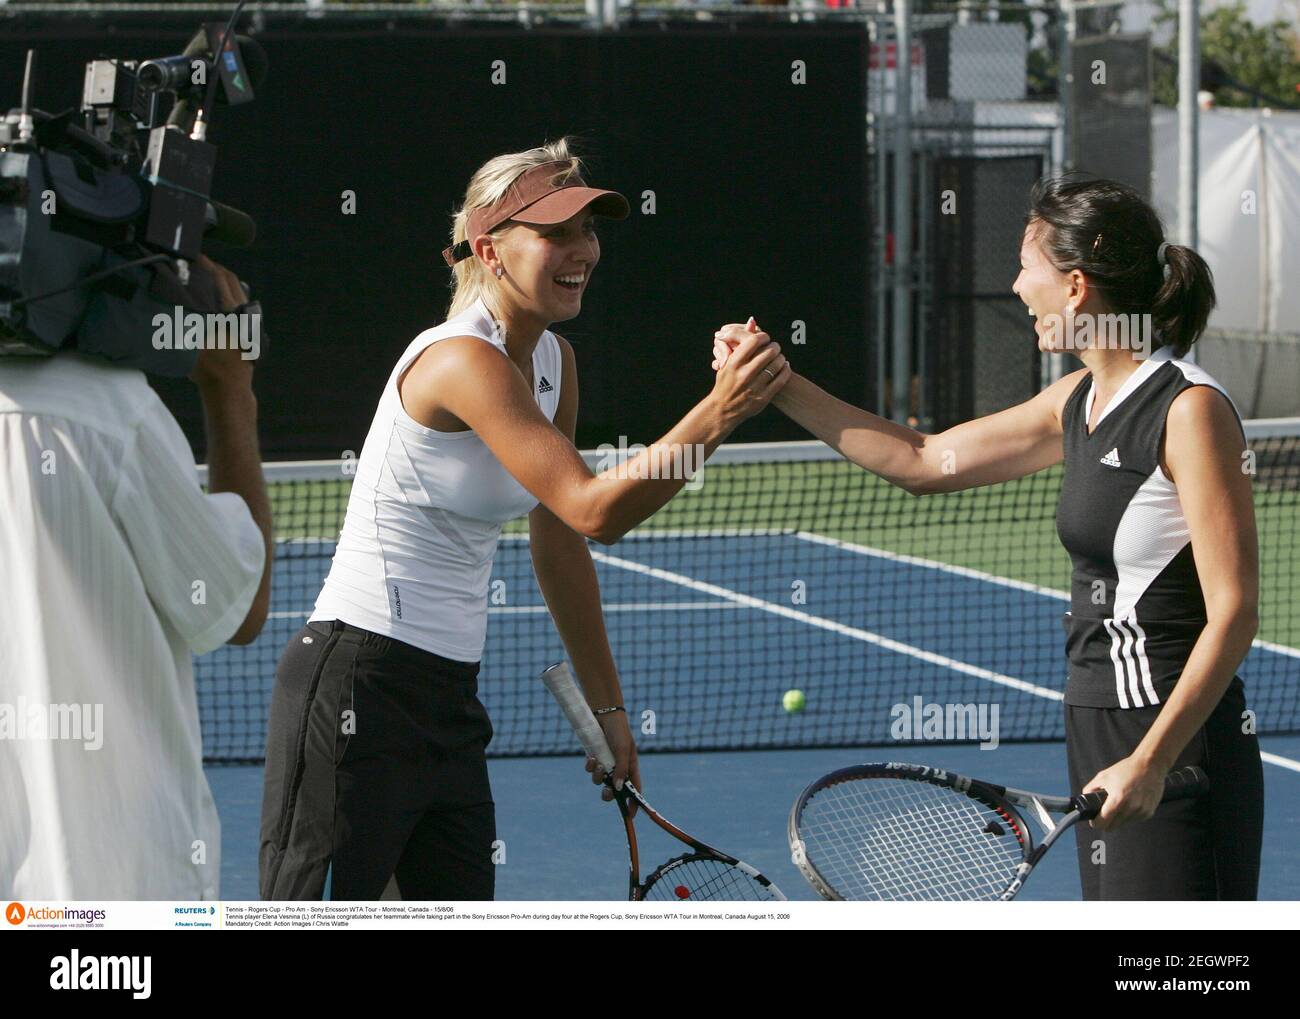 Tennis - Rogers Cup - Pro Am - Sony Ericsson WTA Tour - Montreal, Canada - 15/8/06  Tennis player Elena Vesnina (L) of Russia congratulates her teammate while taking part in the Sony Ericsson Pro-Am during day four at the Rogers Cup, Sony Ericsson WTA Tour in Montreal, Canada August 15, 2006  Mandatory Credit: Action Images / Chris Wattie Stock Photo